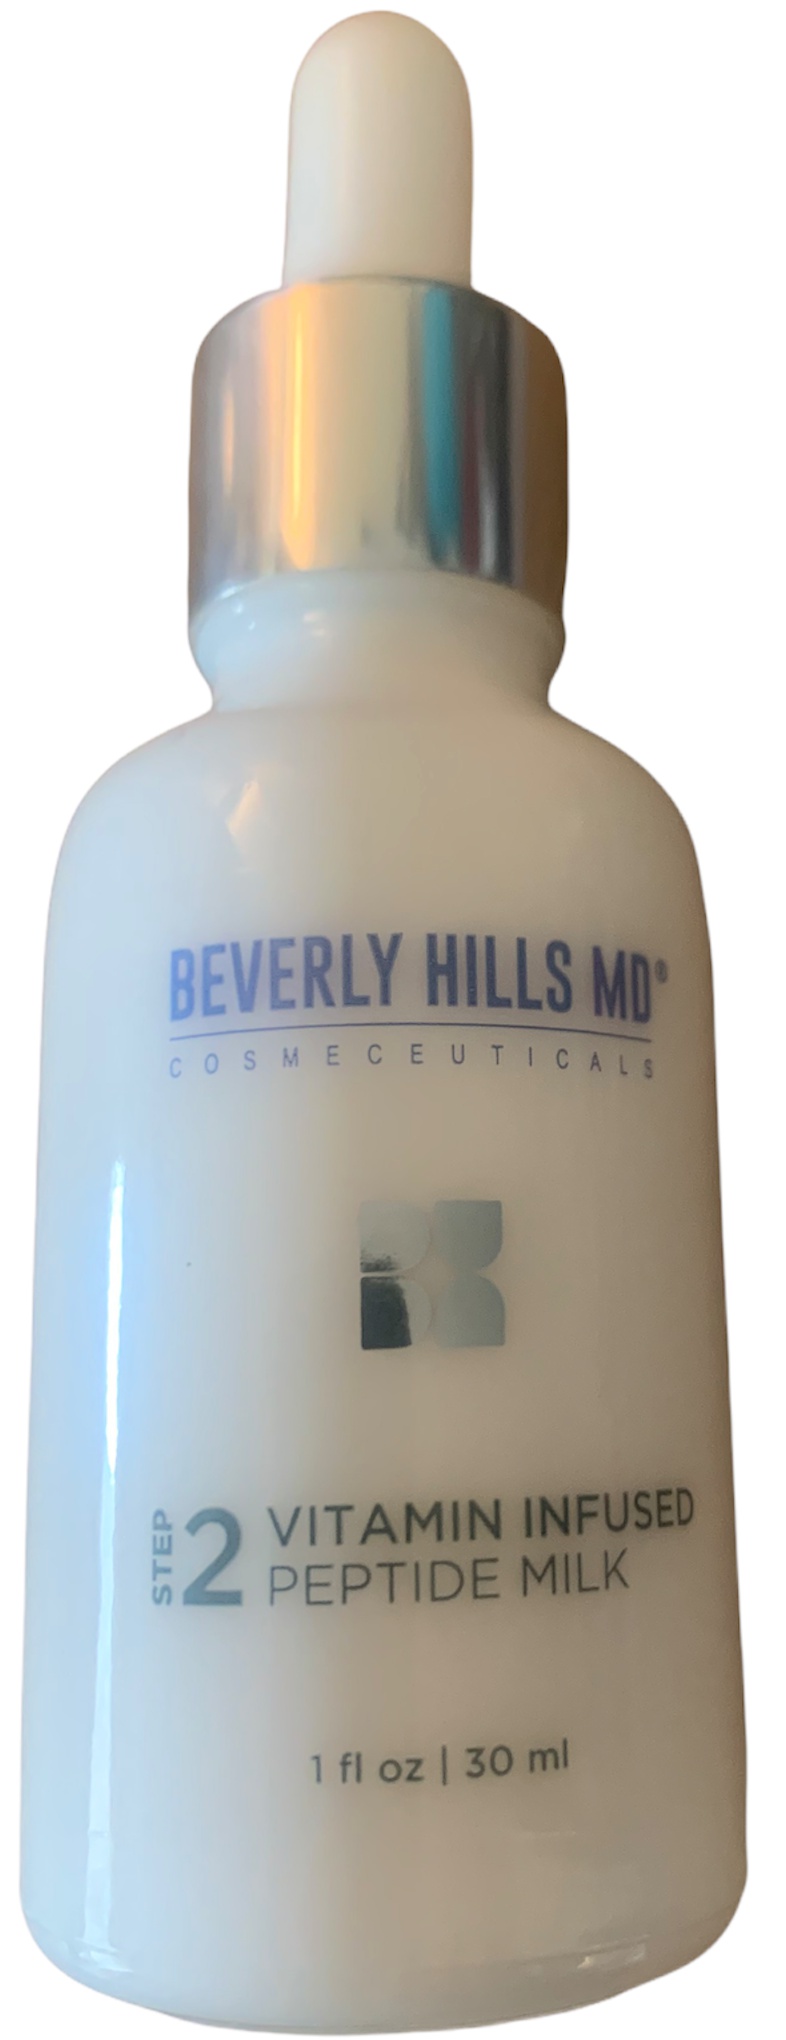 Beverly Hills MD Vitamin Infused Peptide Milk